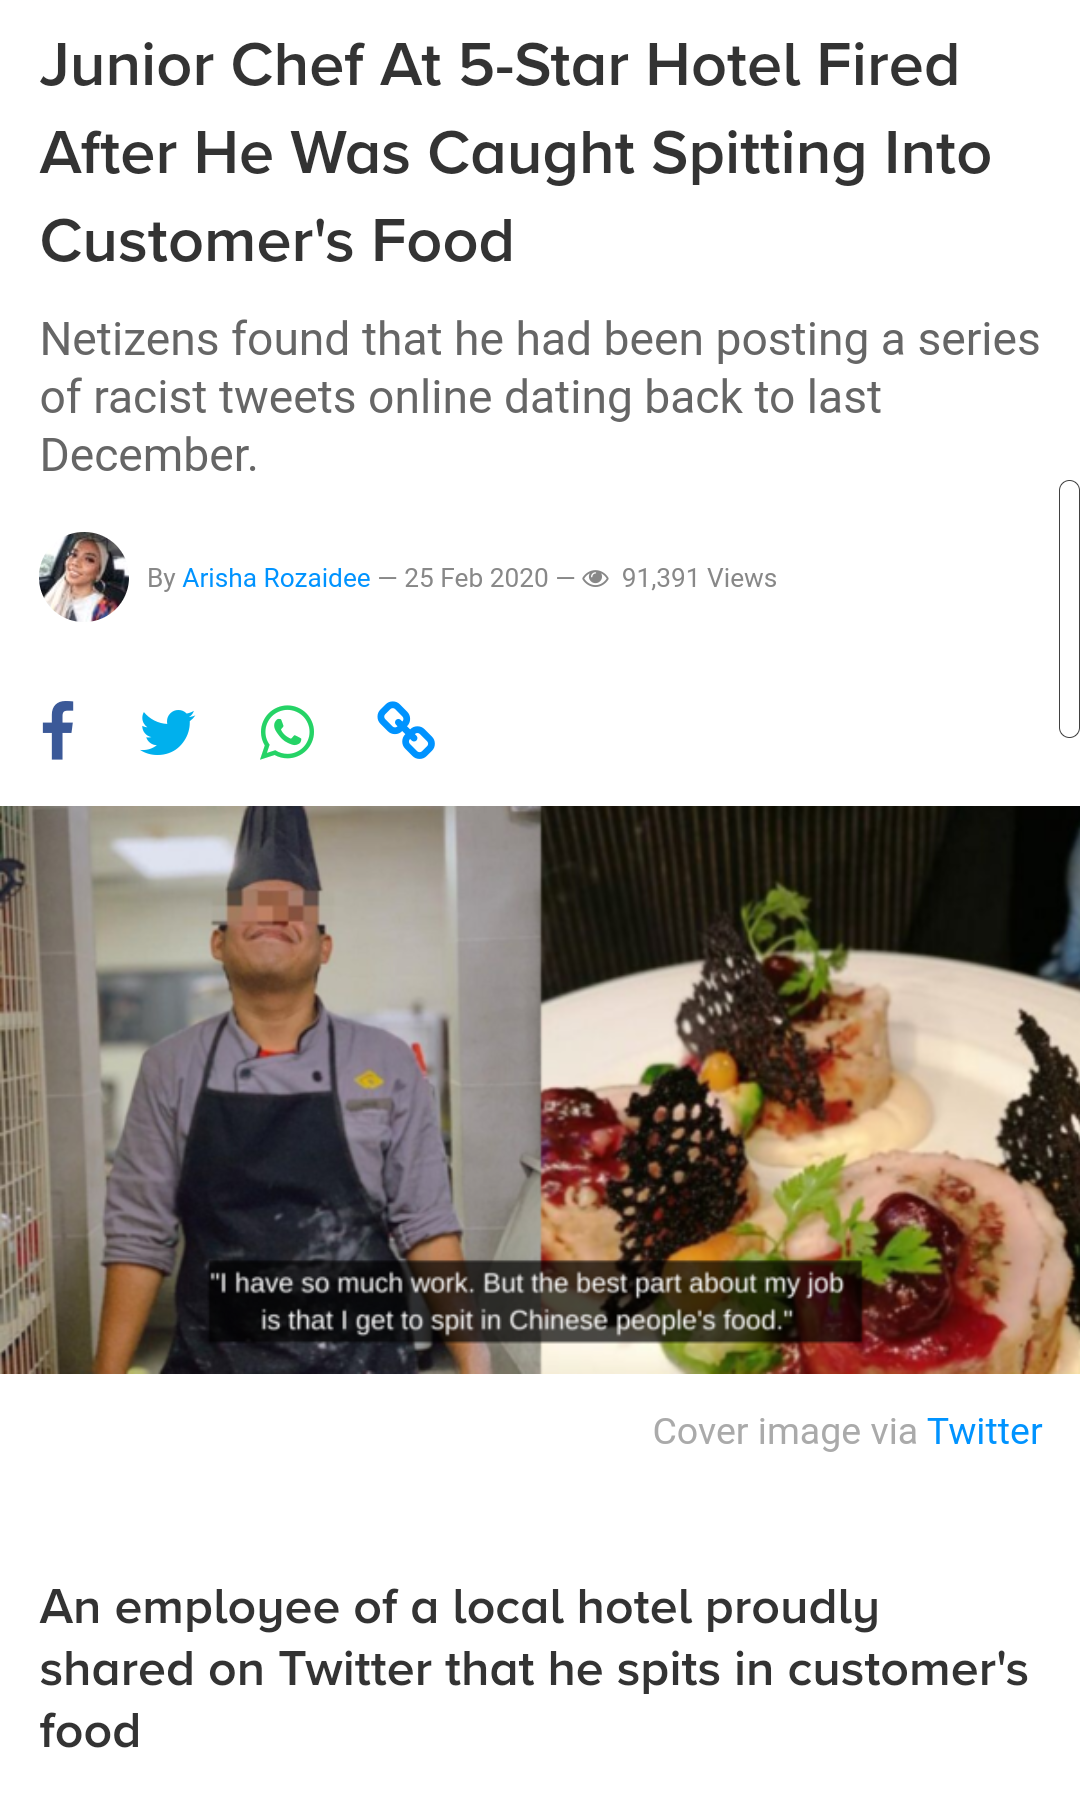 produce - Junior Chef At 5Star Hotel Fired After He Was Caught Spitting Into Customer's Food Netizens found that he had been posting a series of racist tweets online dating back to last December 5 By Arisha Rozade 01,391 V have so much work. Bu best part 